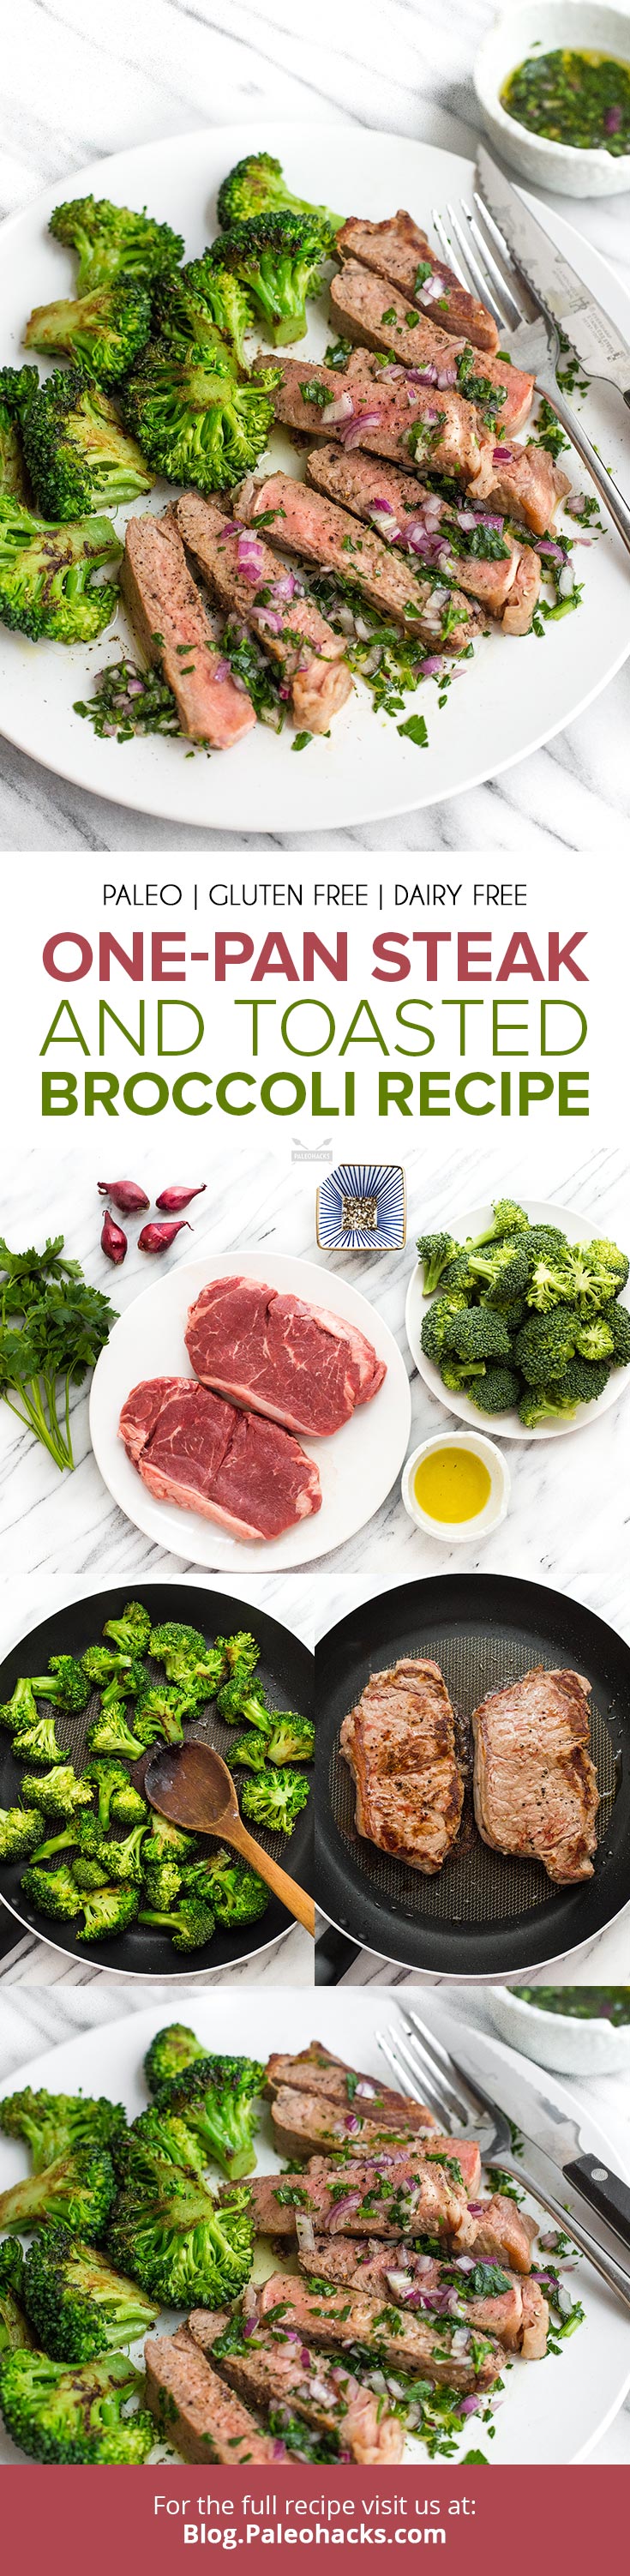 Toss together juicy New York strip steak, crispy broccoli, and a savory dressing in this one-pan meal. Meet your new weeknight favorite!